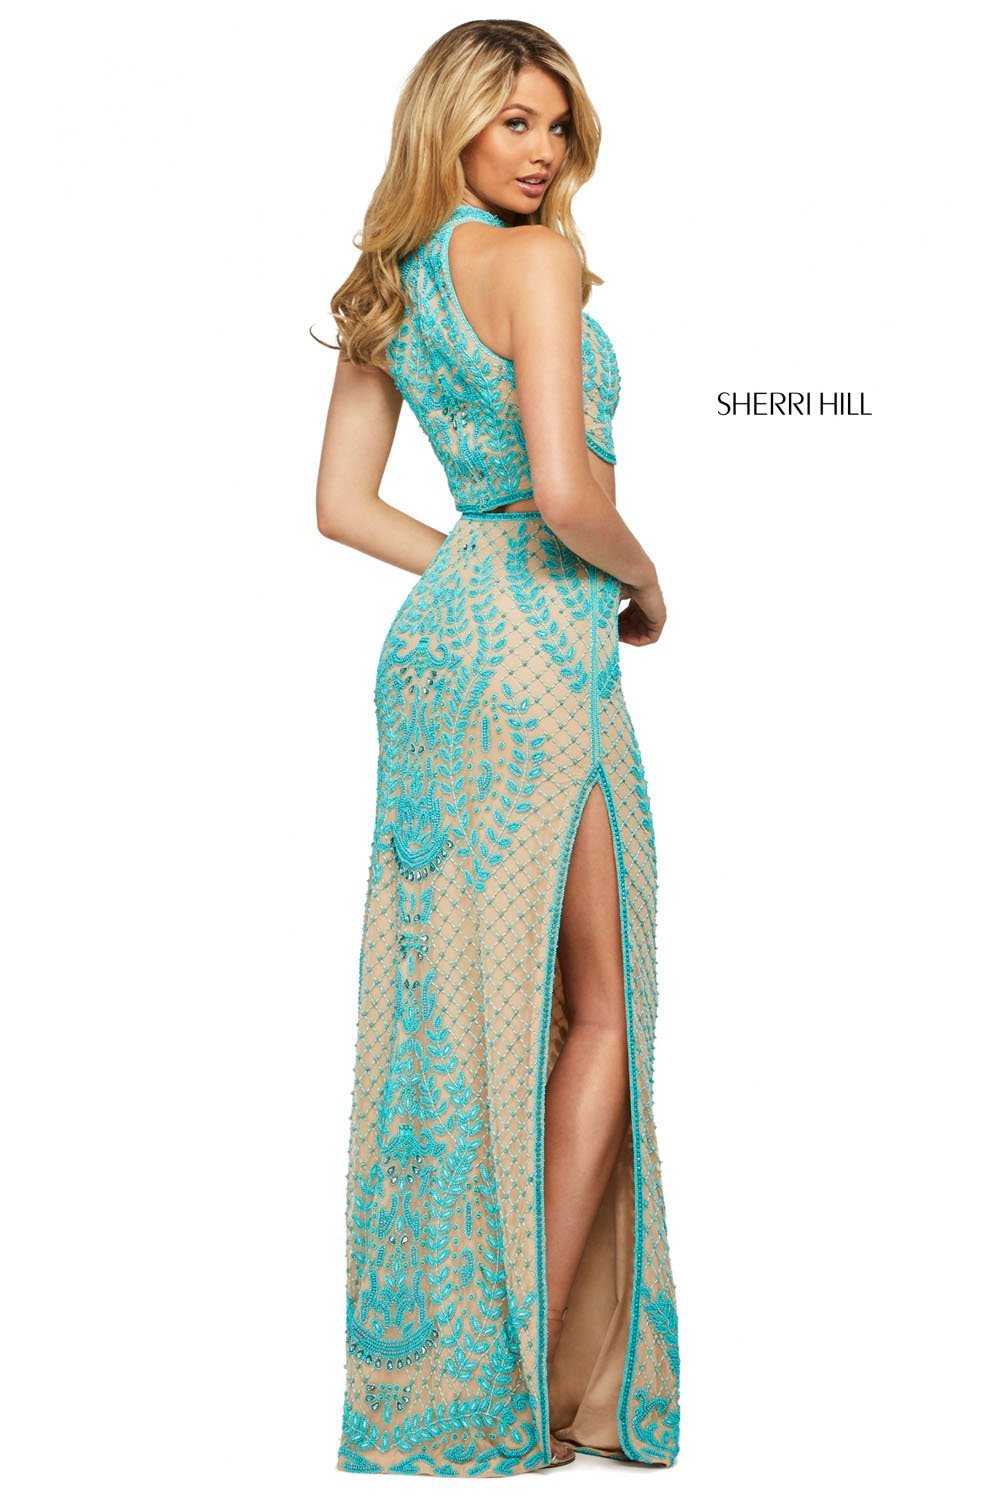 Sherri Hill 53436 dress images in these colors: Nude Ivory, Nude Turquoise, Pink, Coral, Yellow, Aqua.